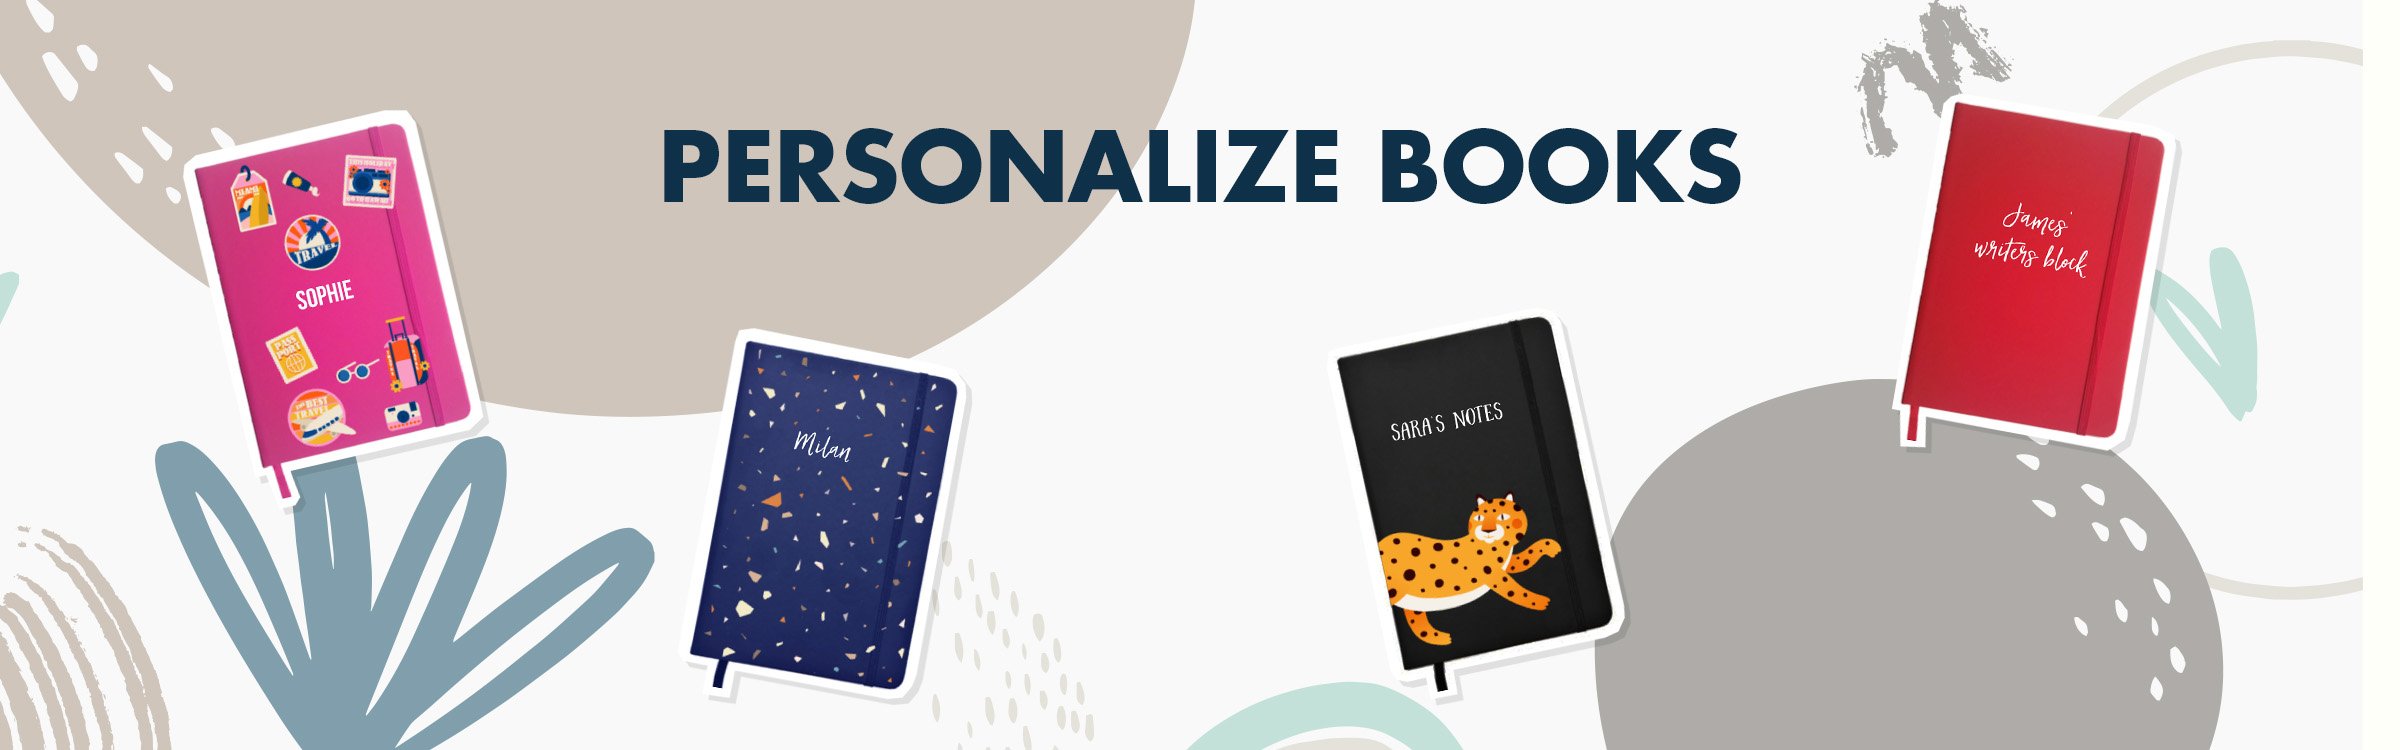 Personalize books such as notebooks with a quote or name